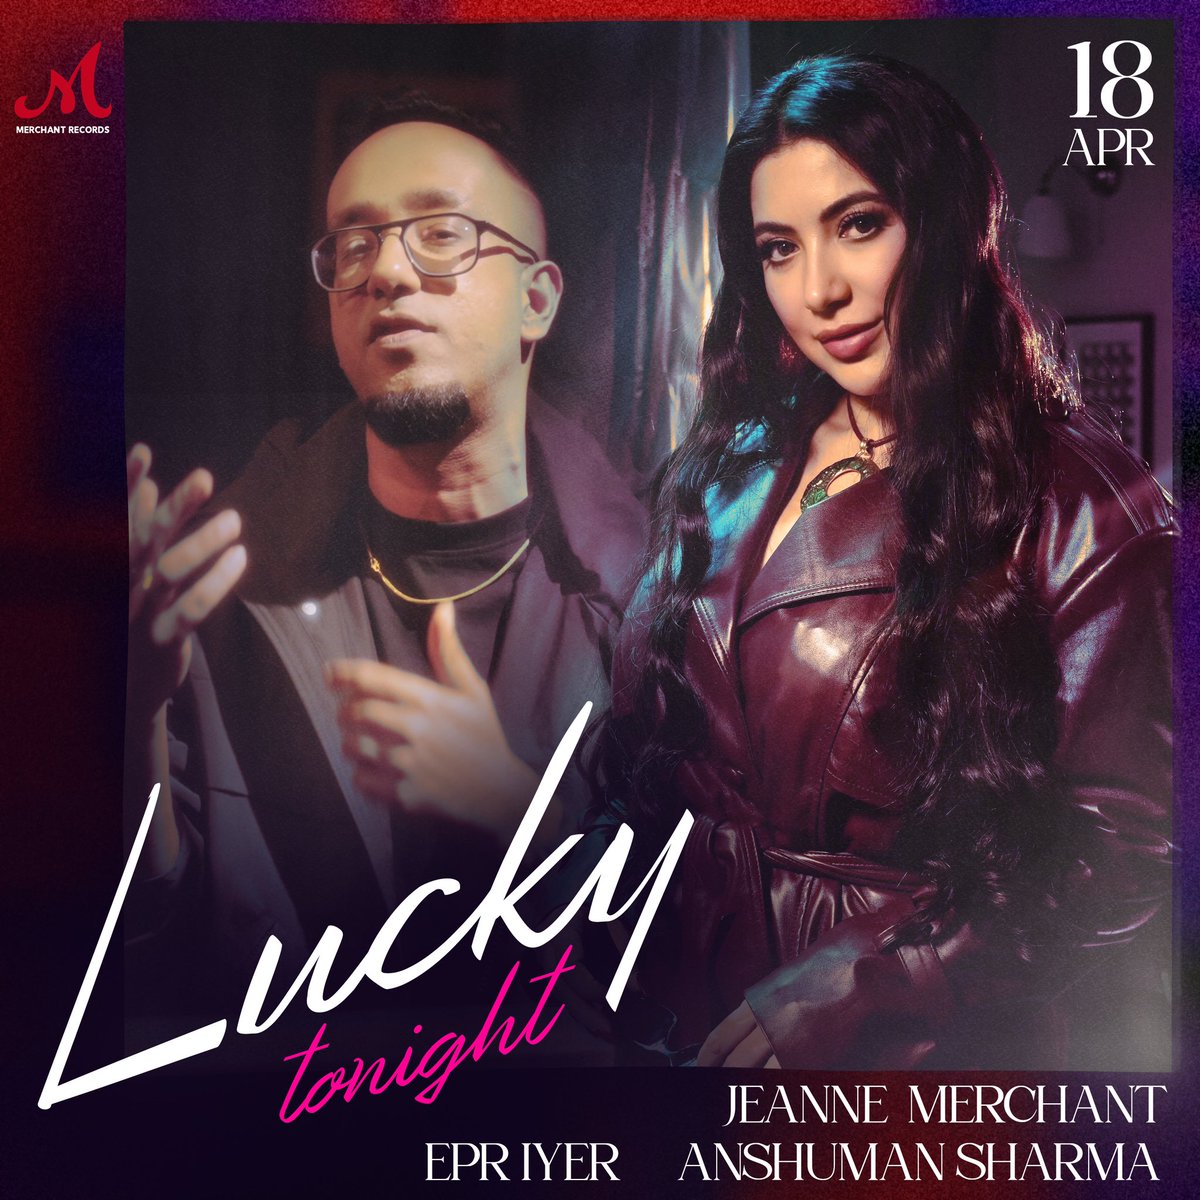 Dive into the electrifying beats of 'Lucky Tonight' by Jeanne Merchant ft. EPR Iyer, dropping April 18th! 🎶only on @SlimSulaiman’s YouTube channel and all streaming platforms! 🌃 #UrbanVibes #NewMusic #LuckyTonight #Merchantrecords #SalimSulaiman